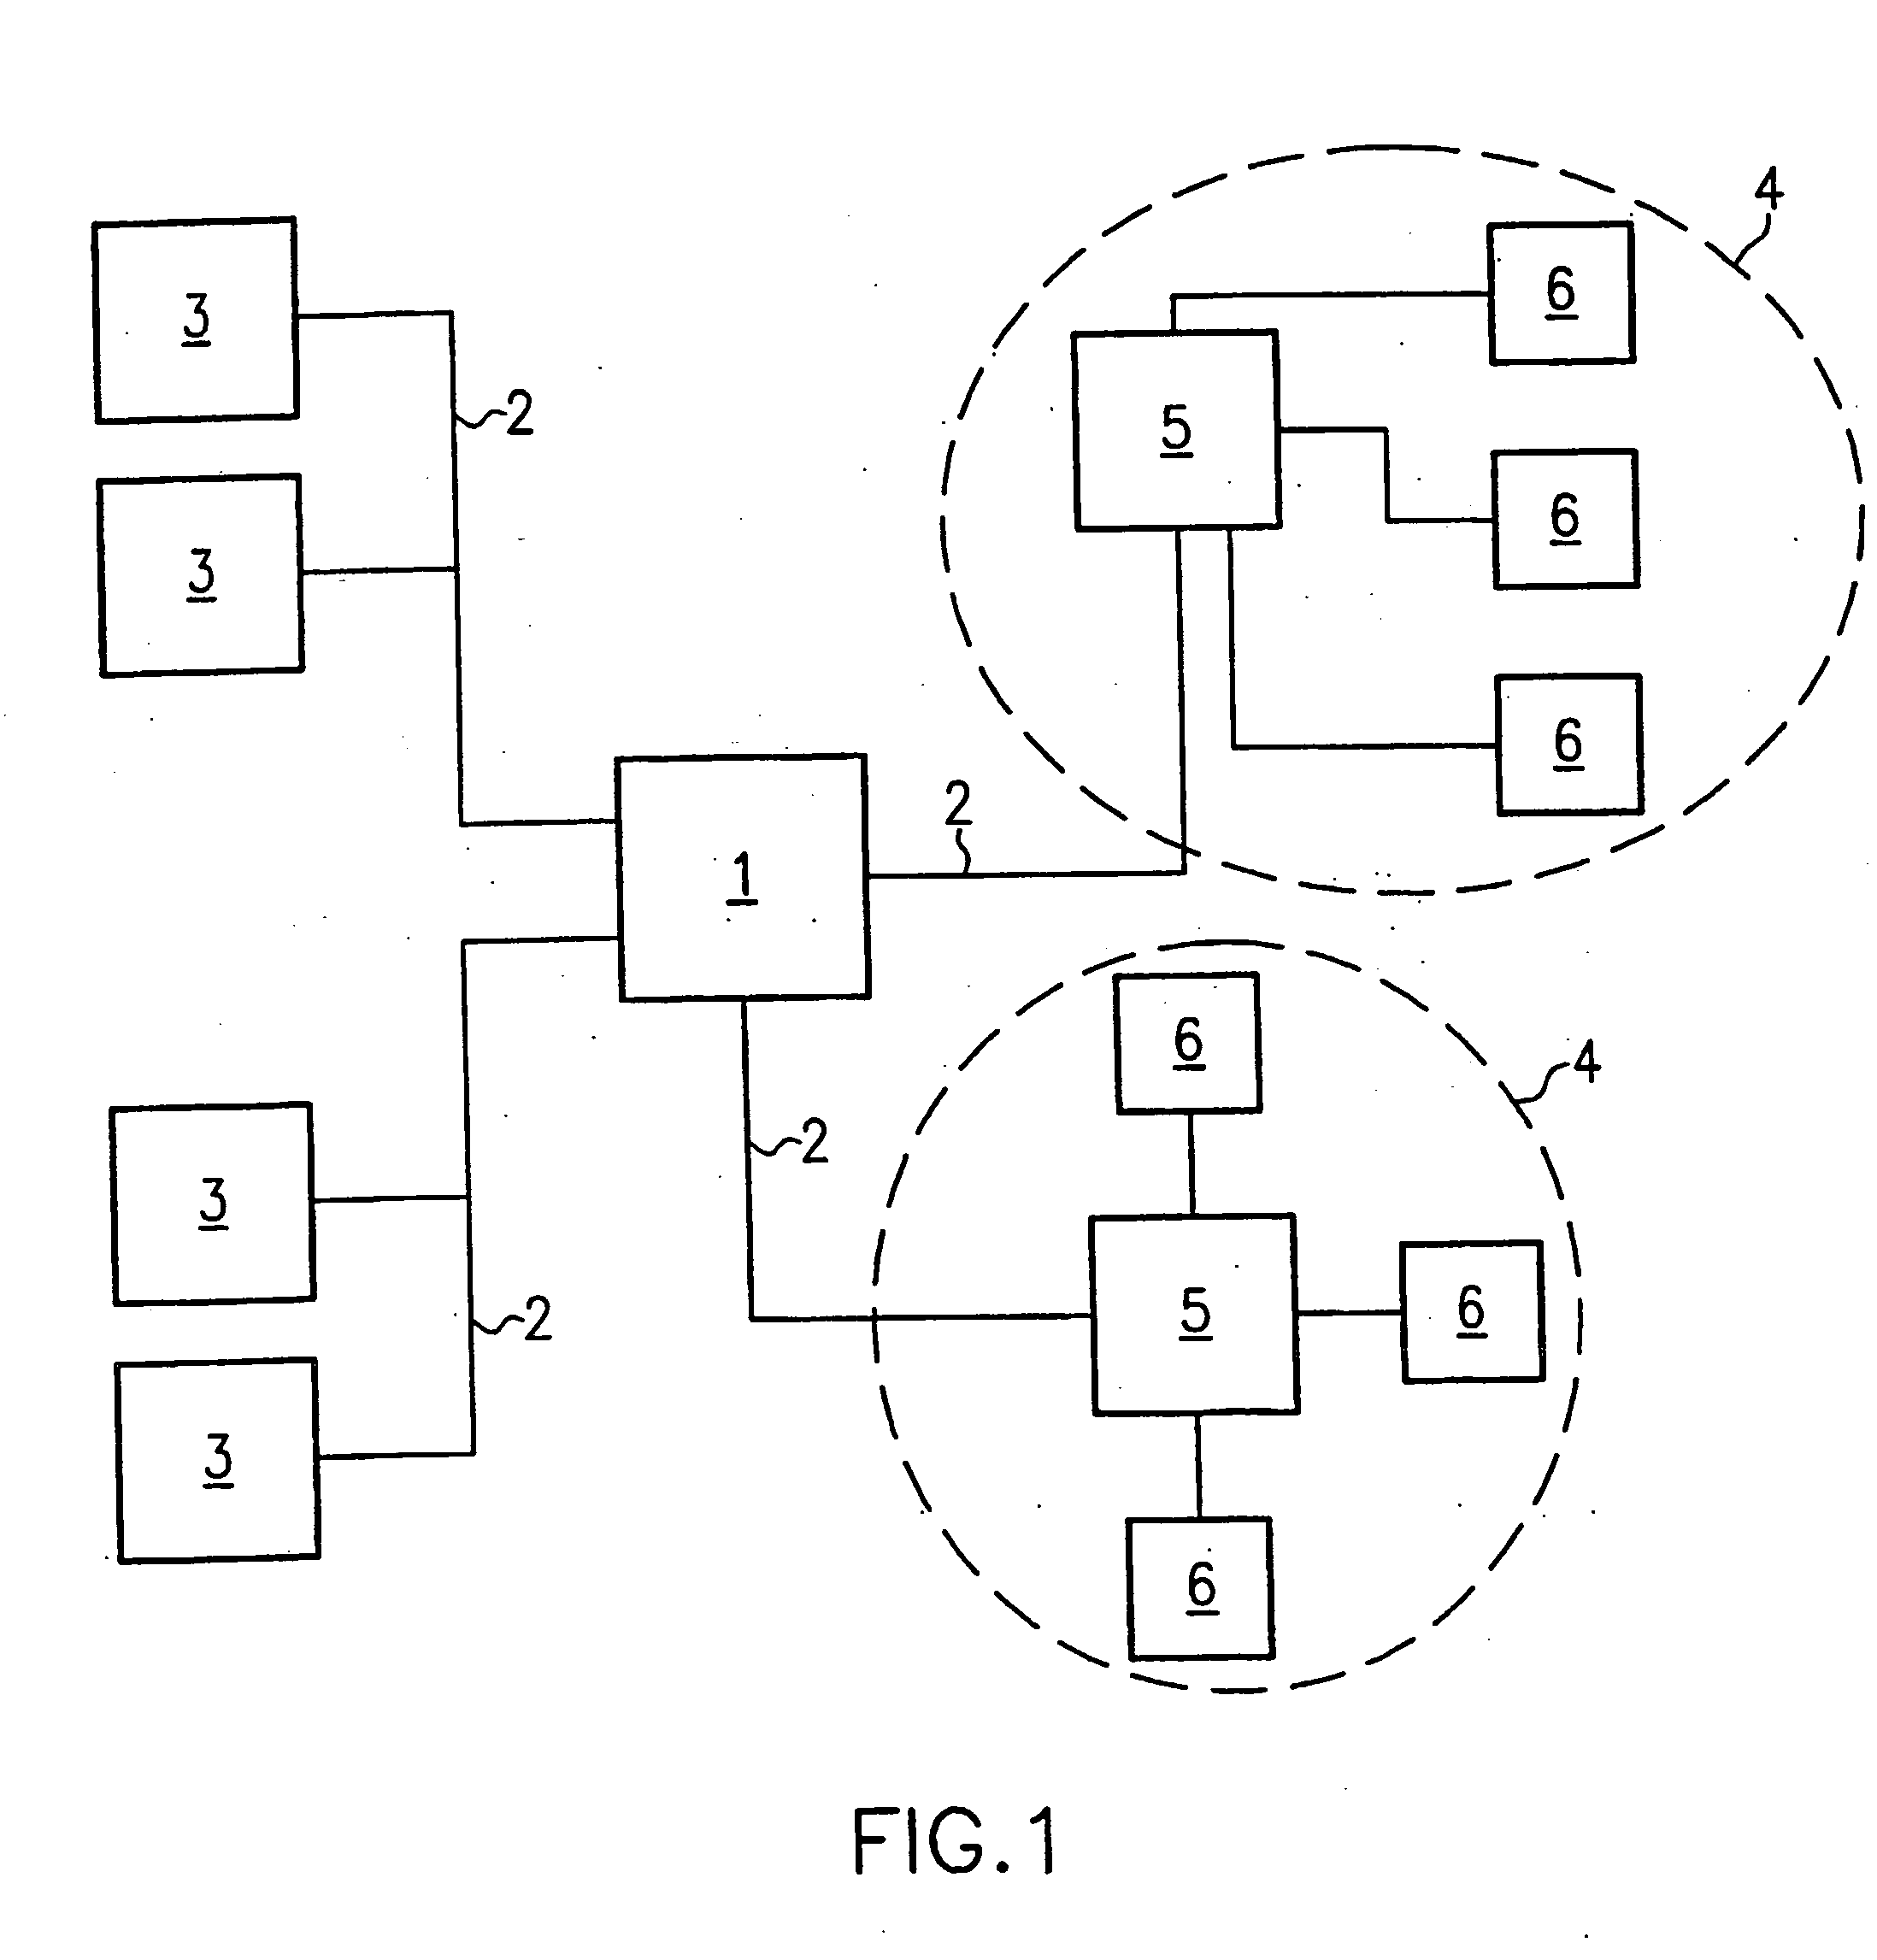 Document processing order management system, method for managing document processing orders, and software product for carring out the method